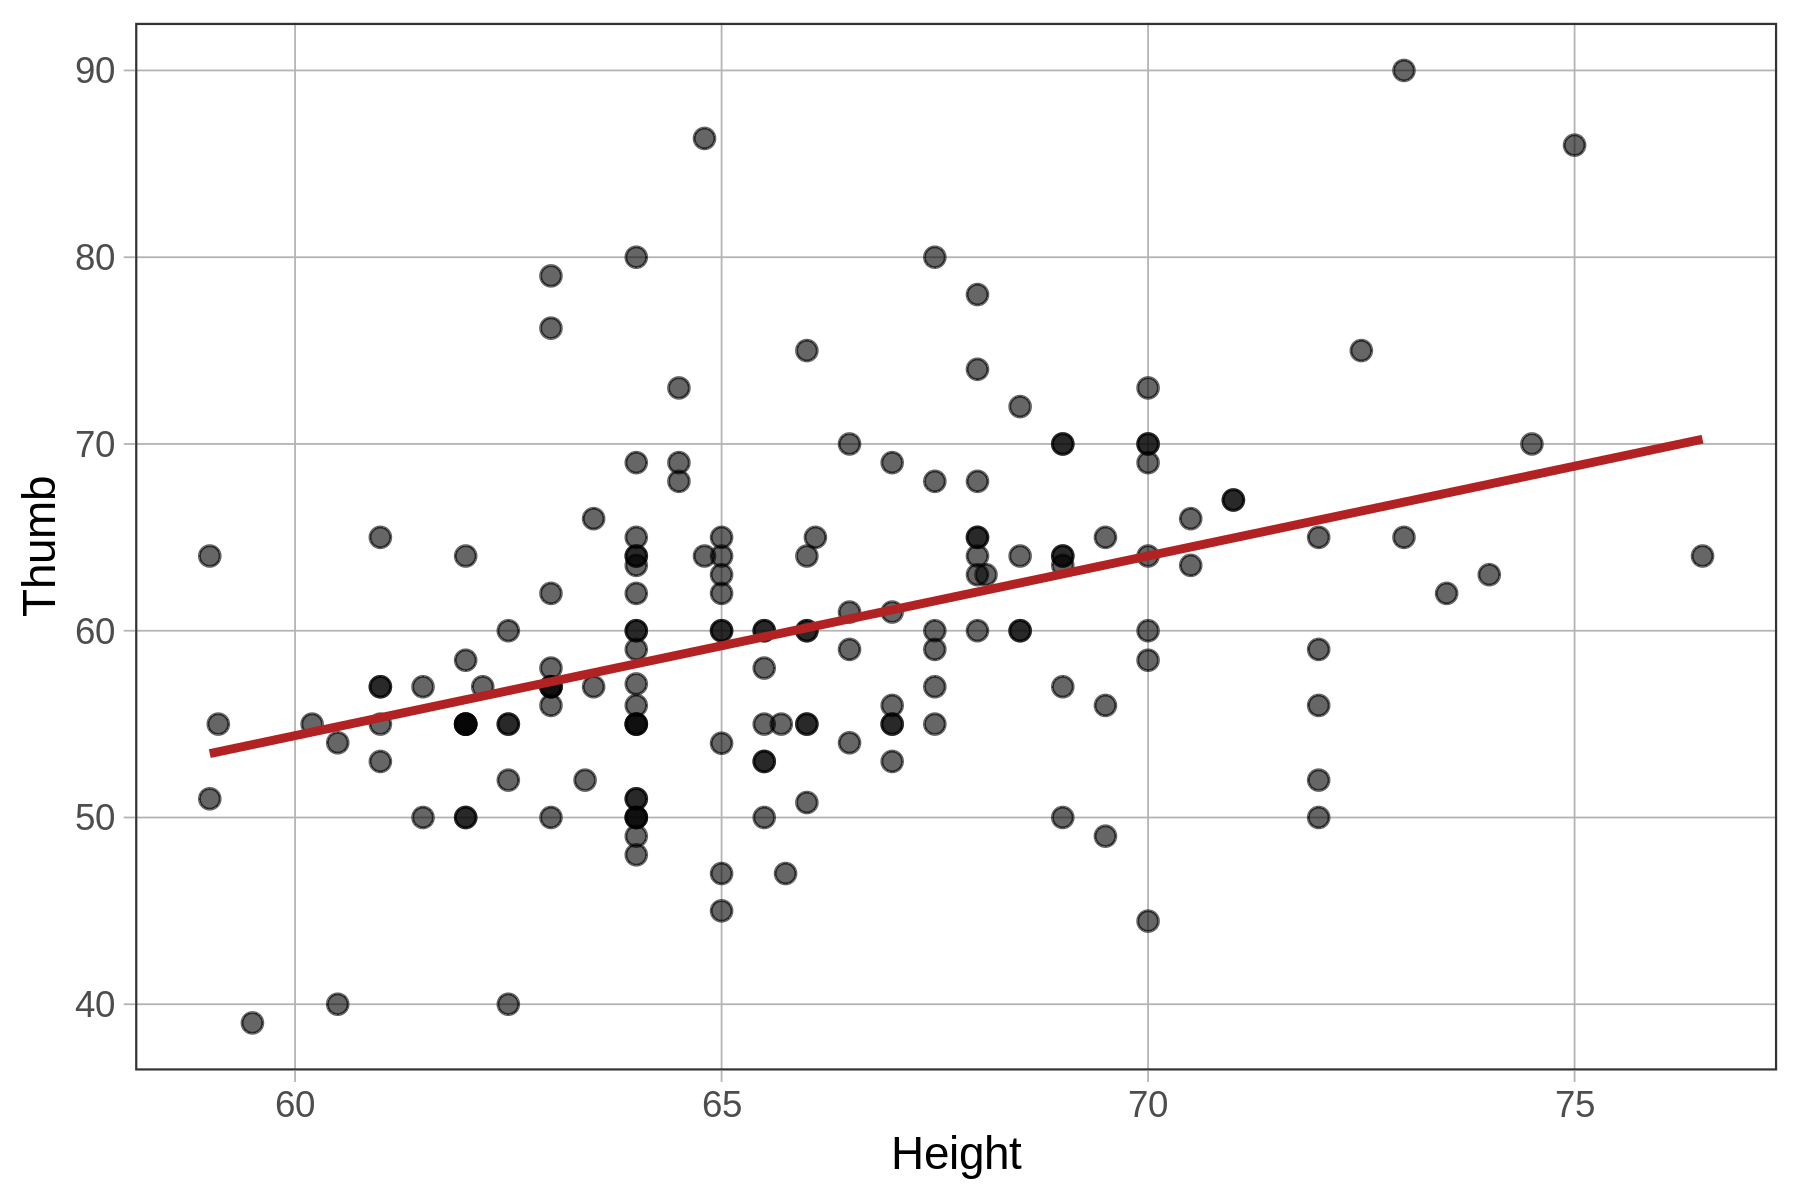 A scatterplot of Thumb by Height overlaid with the regression line in red.